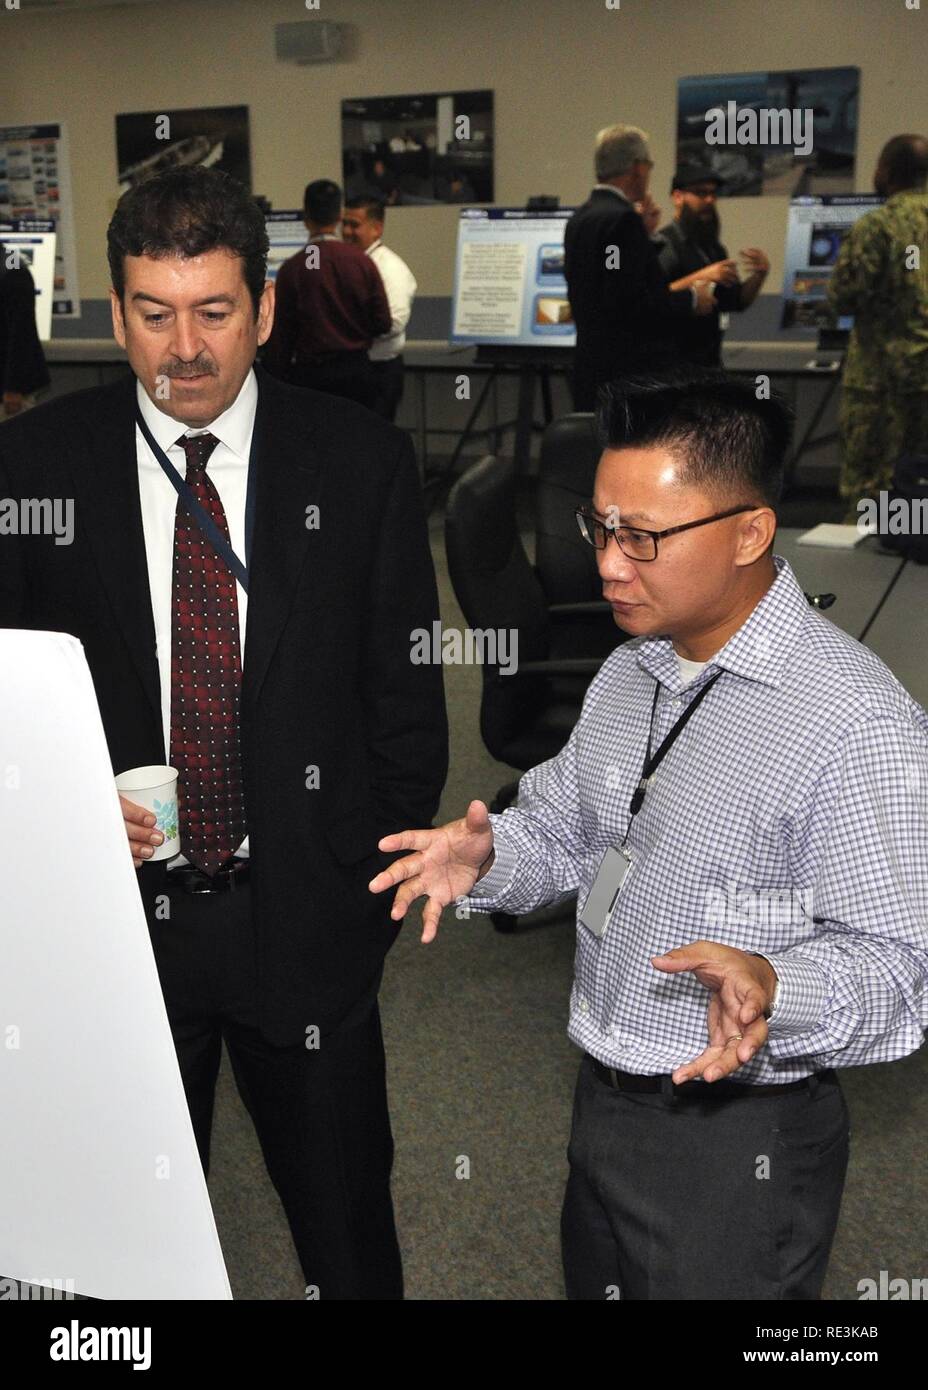 PORT HUENEME, Calif. - Naval Facilities Engineering and Expeditionary Warfare Center (NAVFAC EXWC) Technical Director, Kail Macias (left) talks with Man Nguyen, an engineer and Principle Investigator with Naval Surface Warfare Center, Port Hueneme Division (NSWC PHD) during a joint end of year showcase for the Naval Innovative Science and Engineering (NISE) Program. U.S. Navy Stock Photo